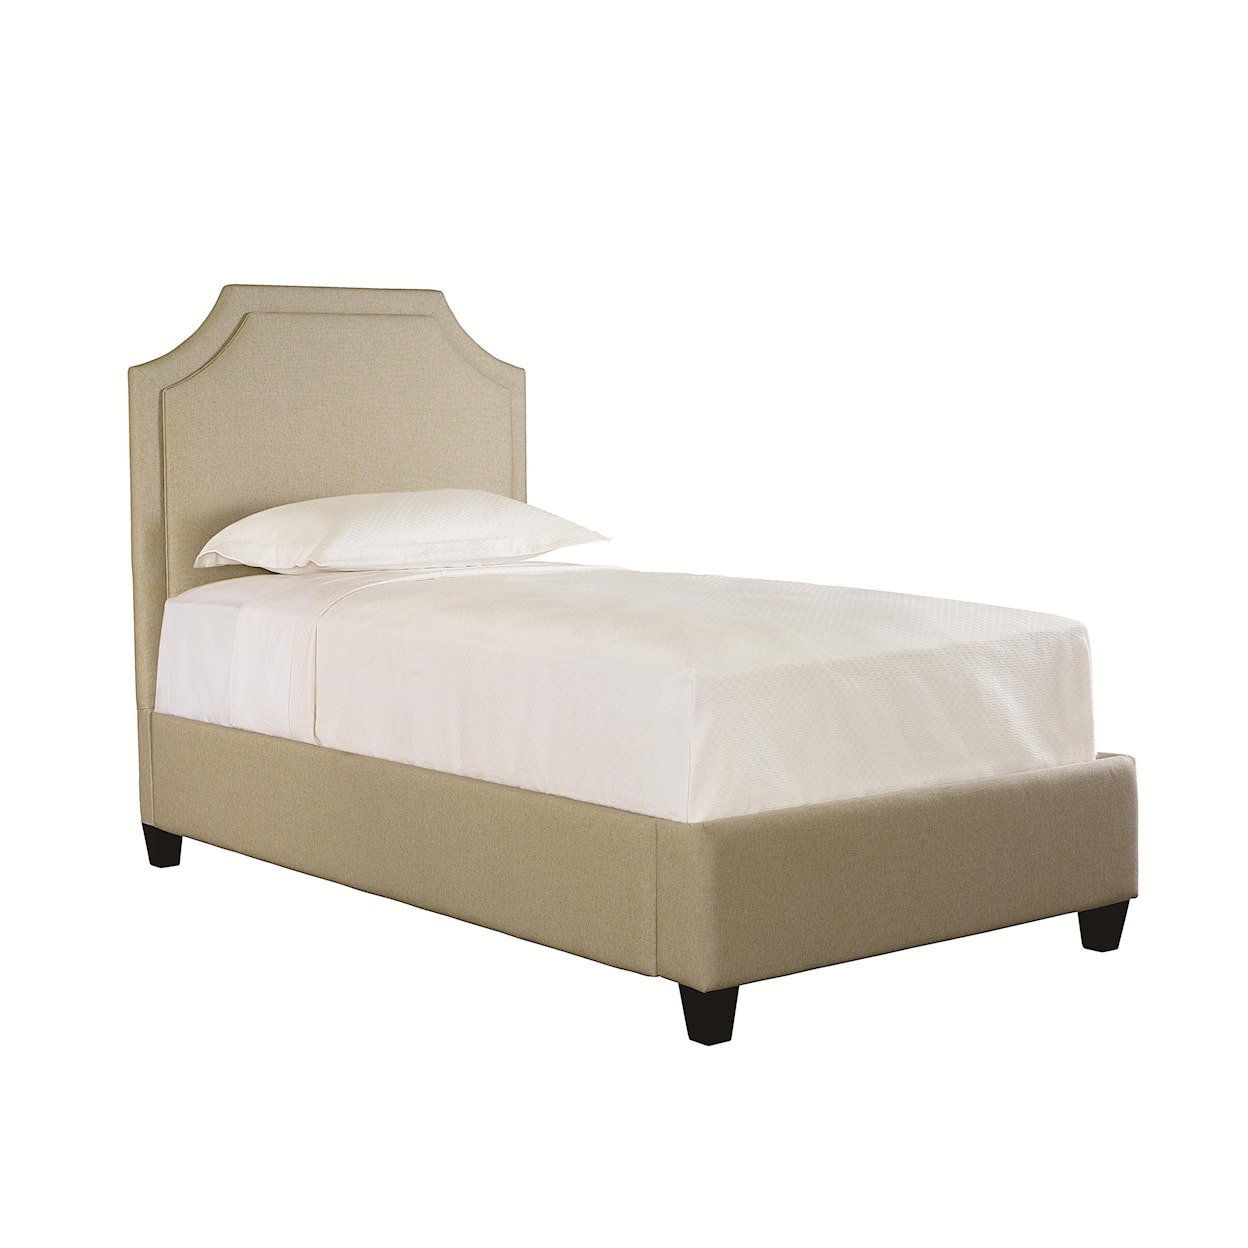 Bassett Custom Upholstered Beds Cal King Florence Upholstered Bed with Low F